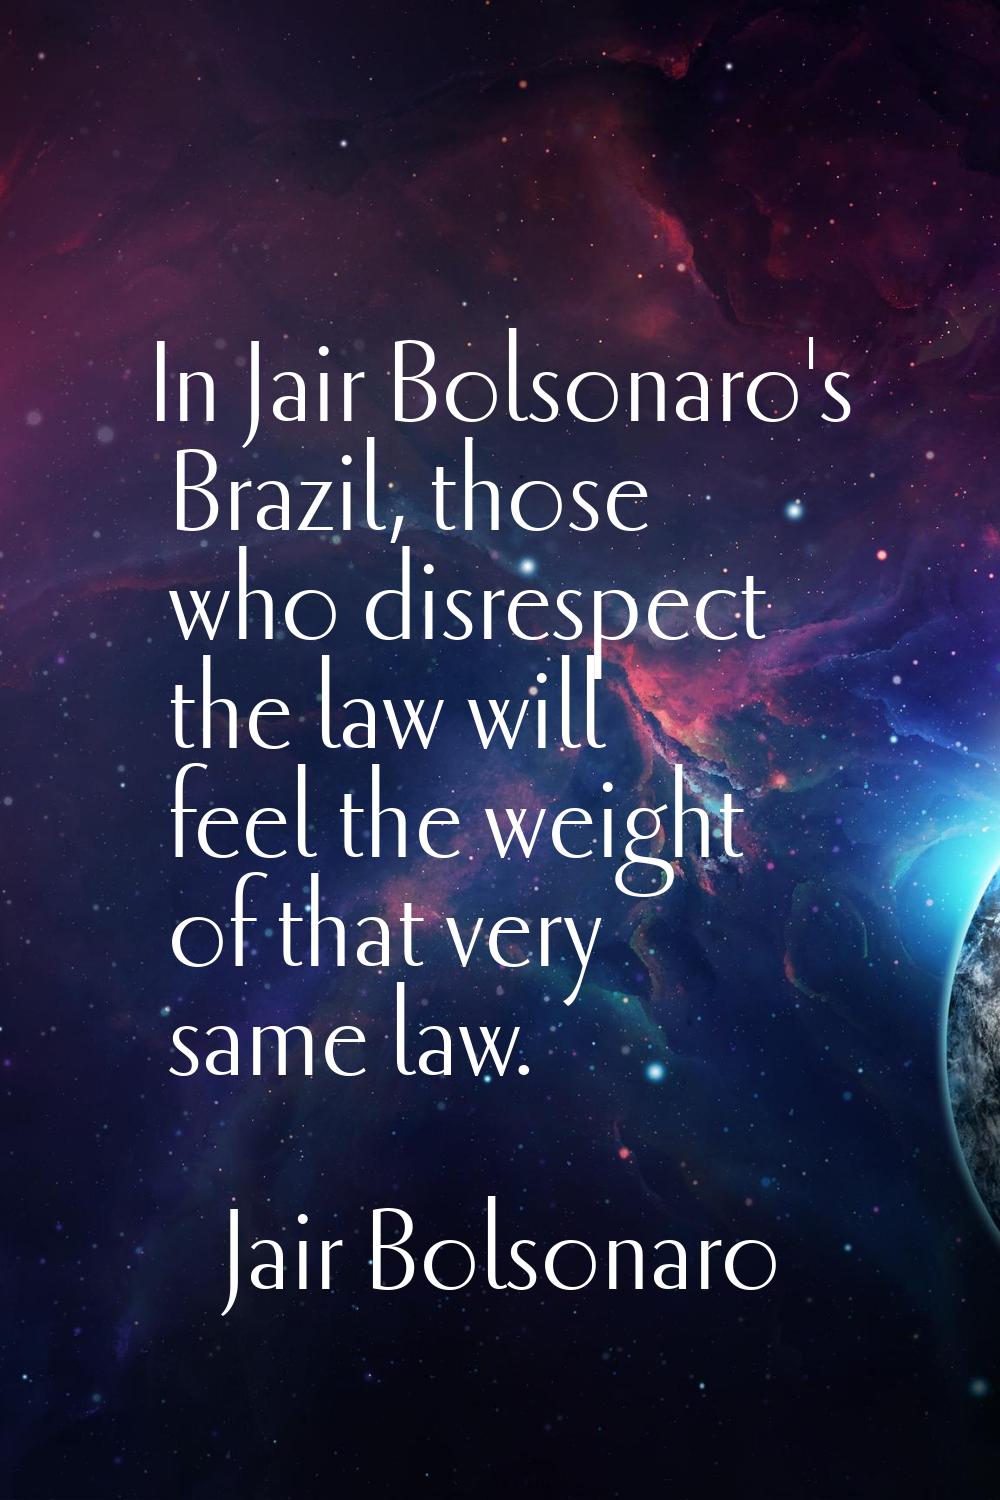 In Jair Bolsonaro's Brazil, those who disrespect the law will feel the weight of that very same law